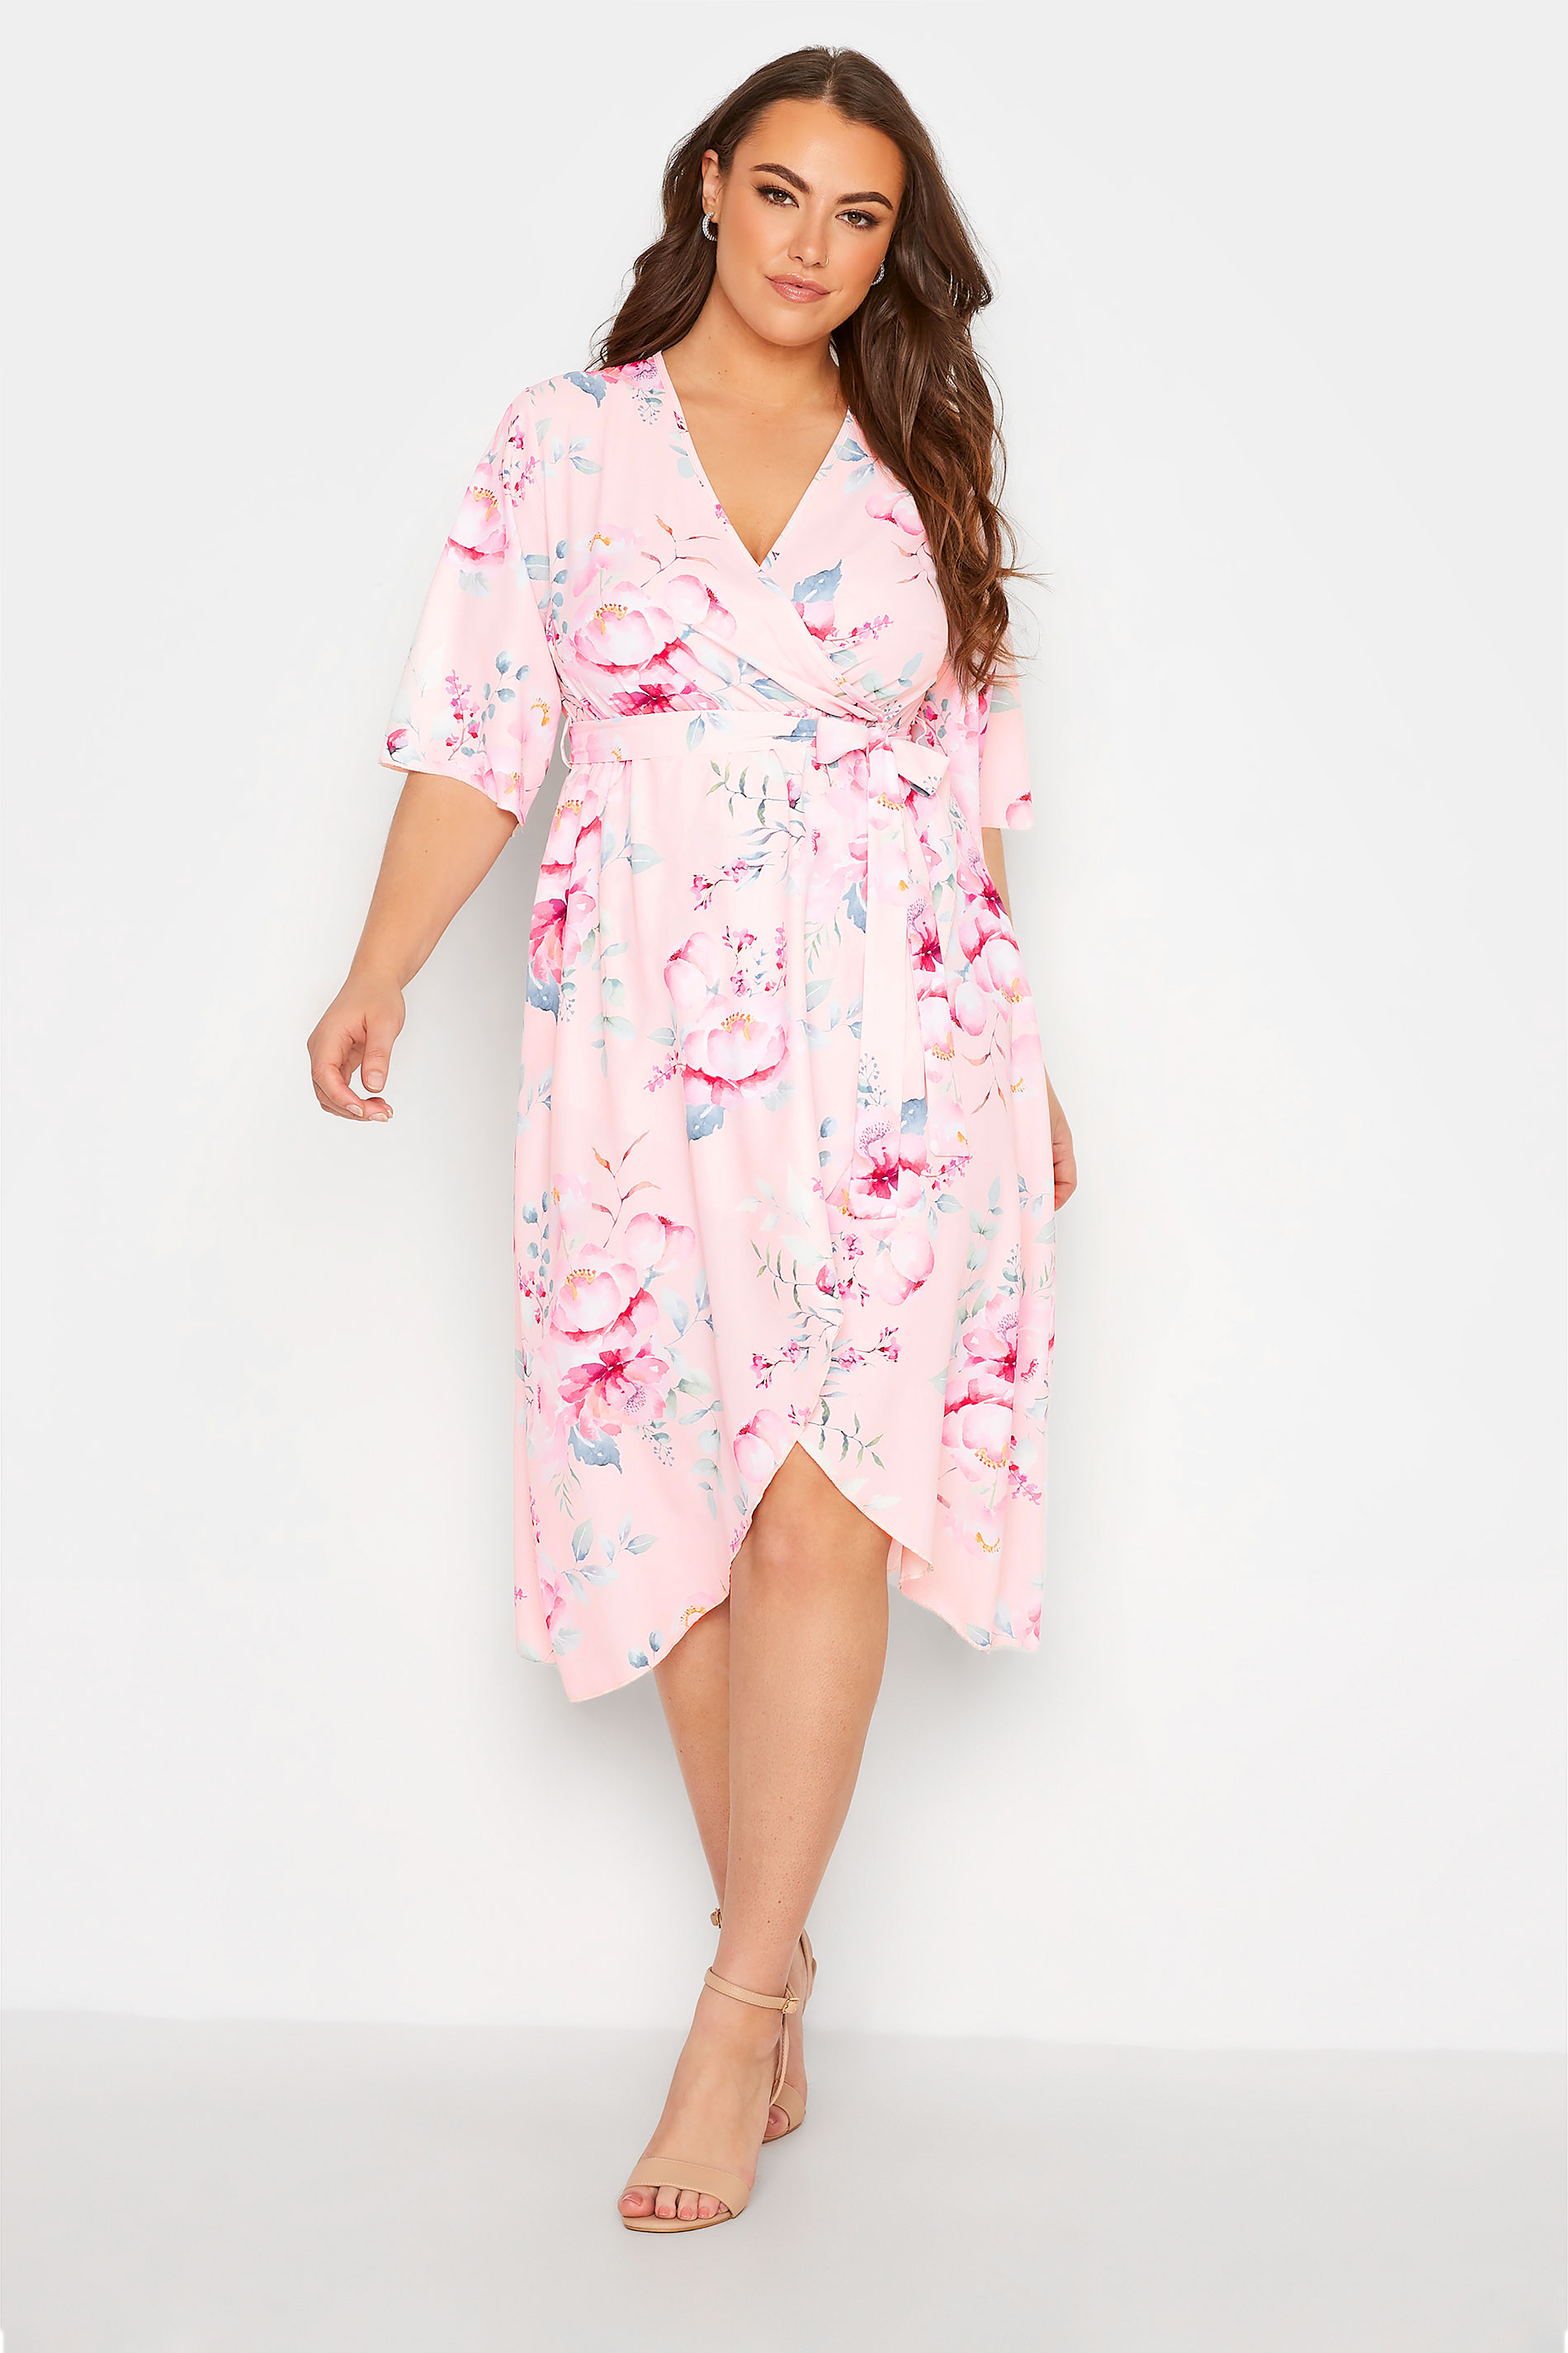 Robes Grande Taille Grande taille  Robes Portefeuilles | YOURS LONDON - Robe Rose Poudré Floral Style Portefeuille - VH47657